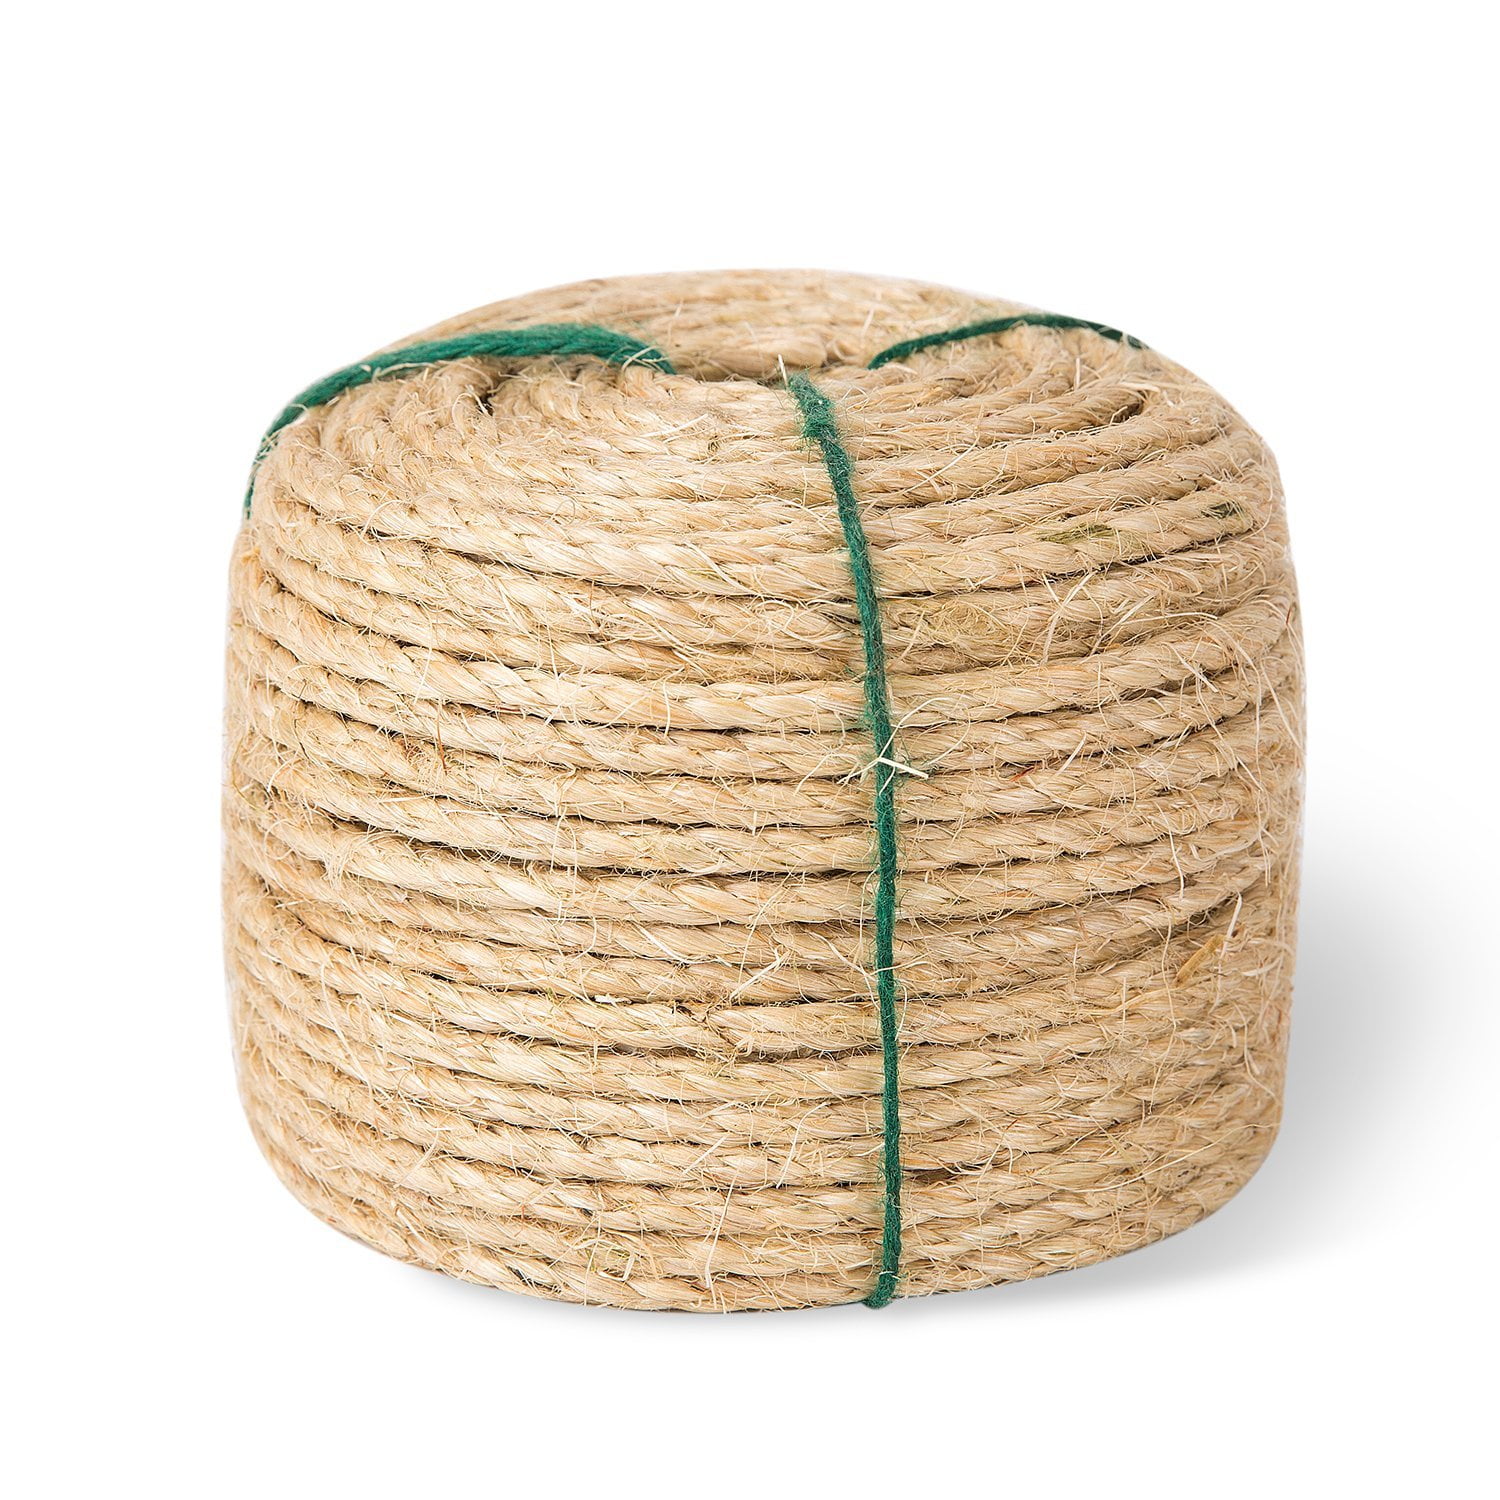 Moisture/Weather Resistant Tie-Downs Indoor/Outdoor Cat Scratching Post Twisted Sisal Rope Marine 3/8 inch 10 feet All Natural Fibers Wicker Chair - SGT KNOTS Projects Decor 